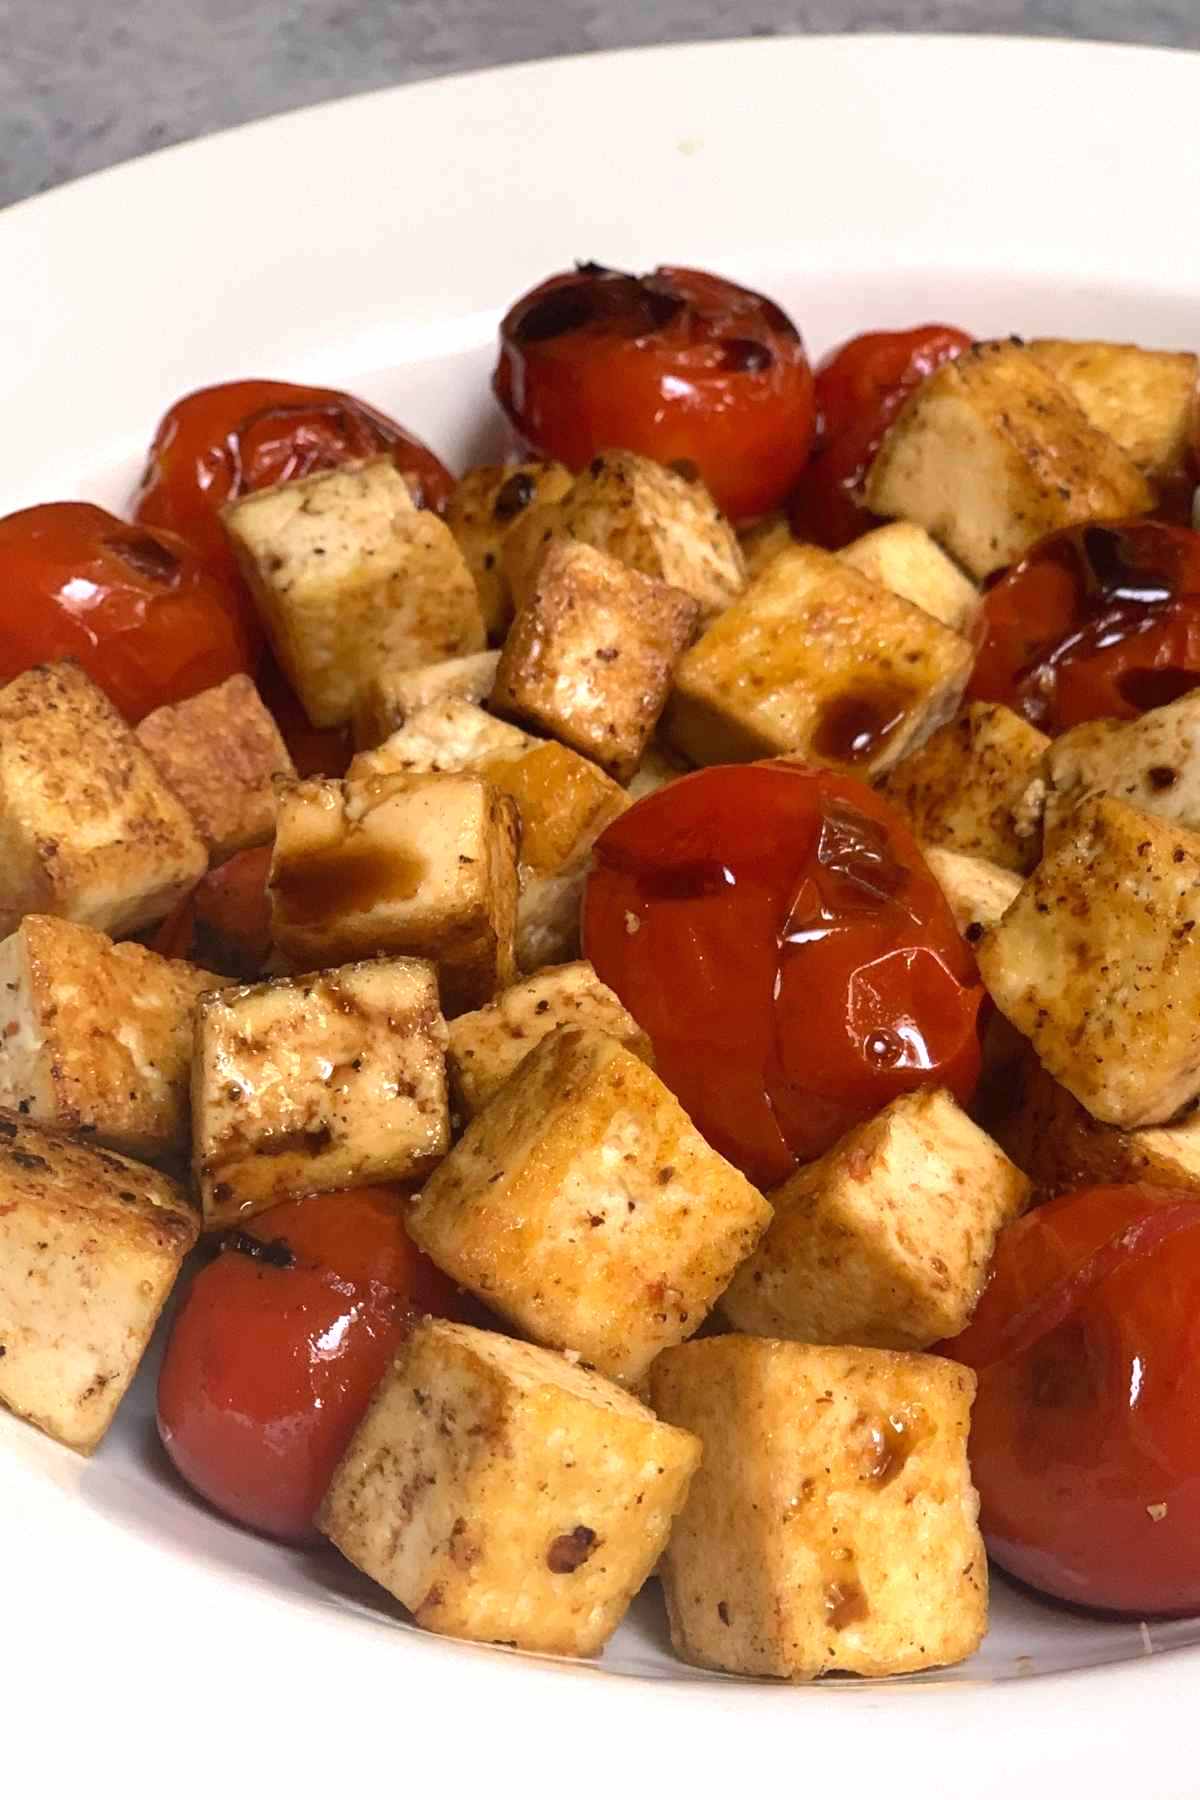 Crispy Tofu with Balsamic Tomatoes is so flavorful and really easy to make! Your days of serving bland tofu are officially over! With just a few simple ingredients, you’ll have crispy and flavorful tofu that pairs well with so many dishes.